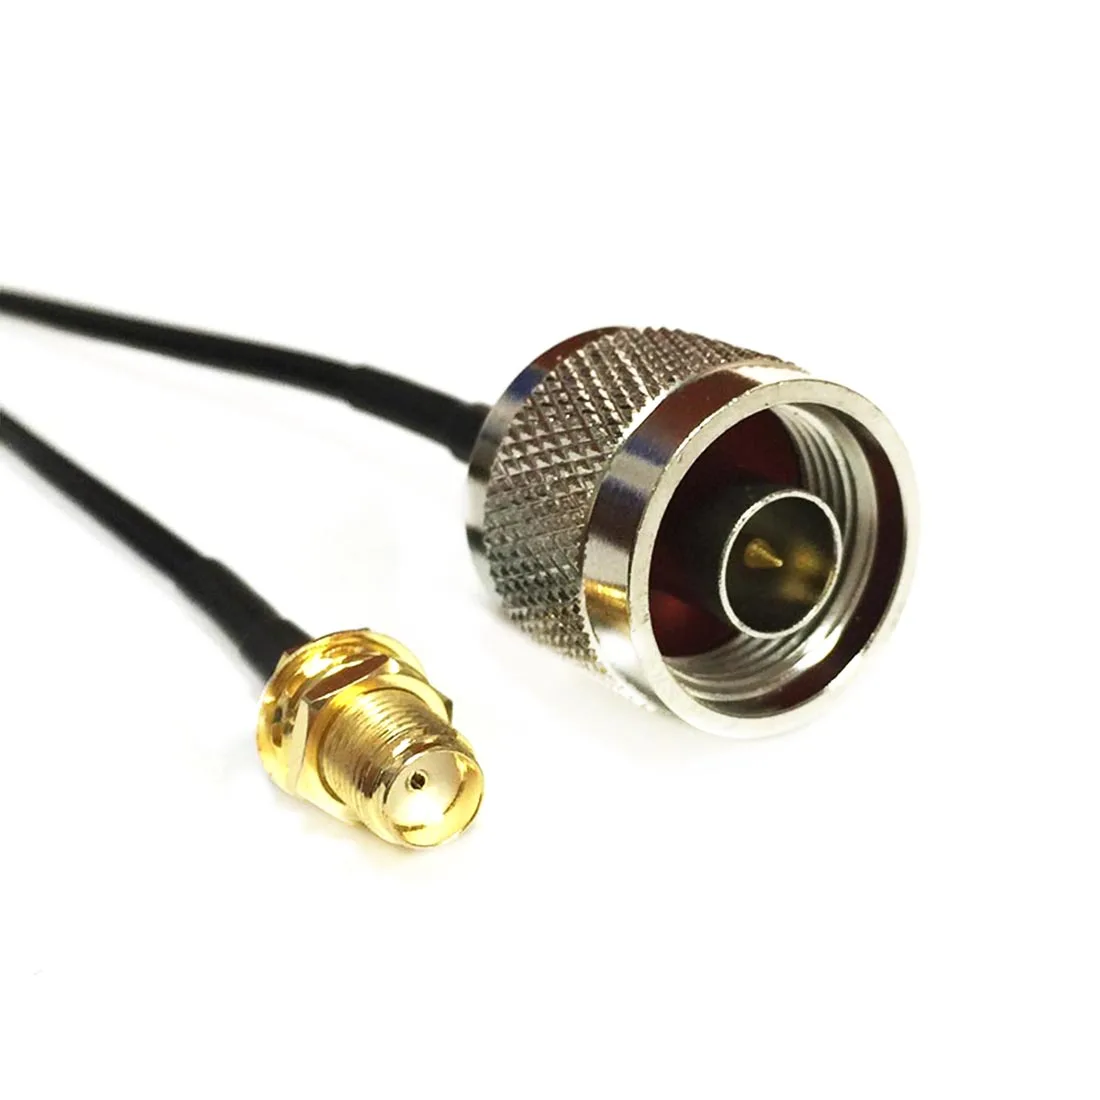 

Modem Extension Cable SMA Female Jack nut Switch N Male Plug RF Pigtail Connector RG174 Cable 20cm 8inch Fast Ship New